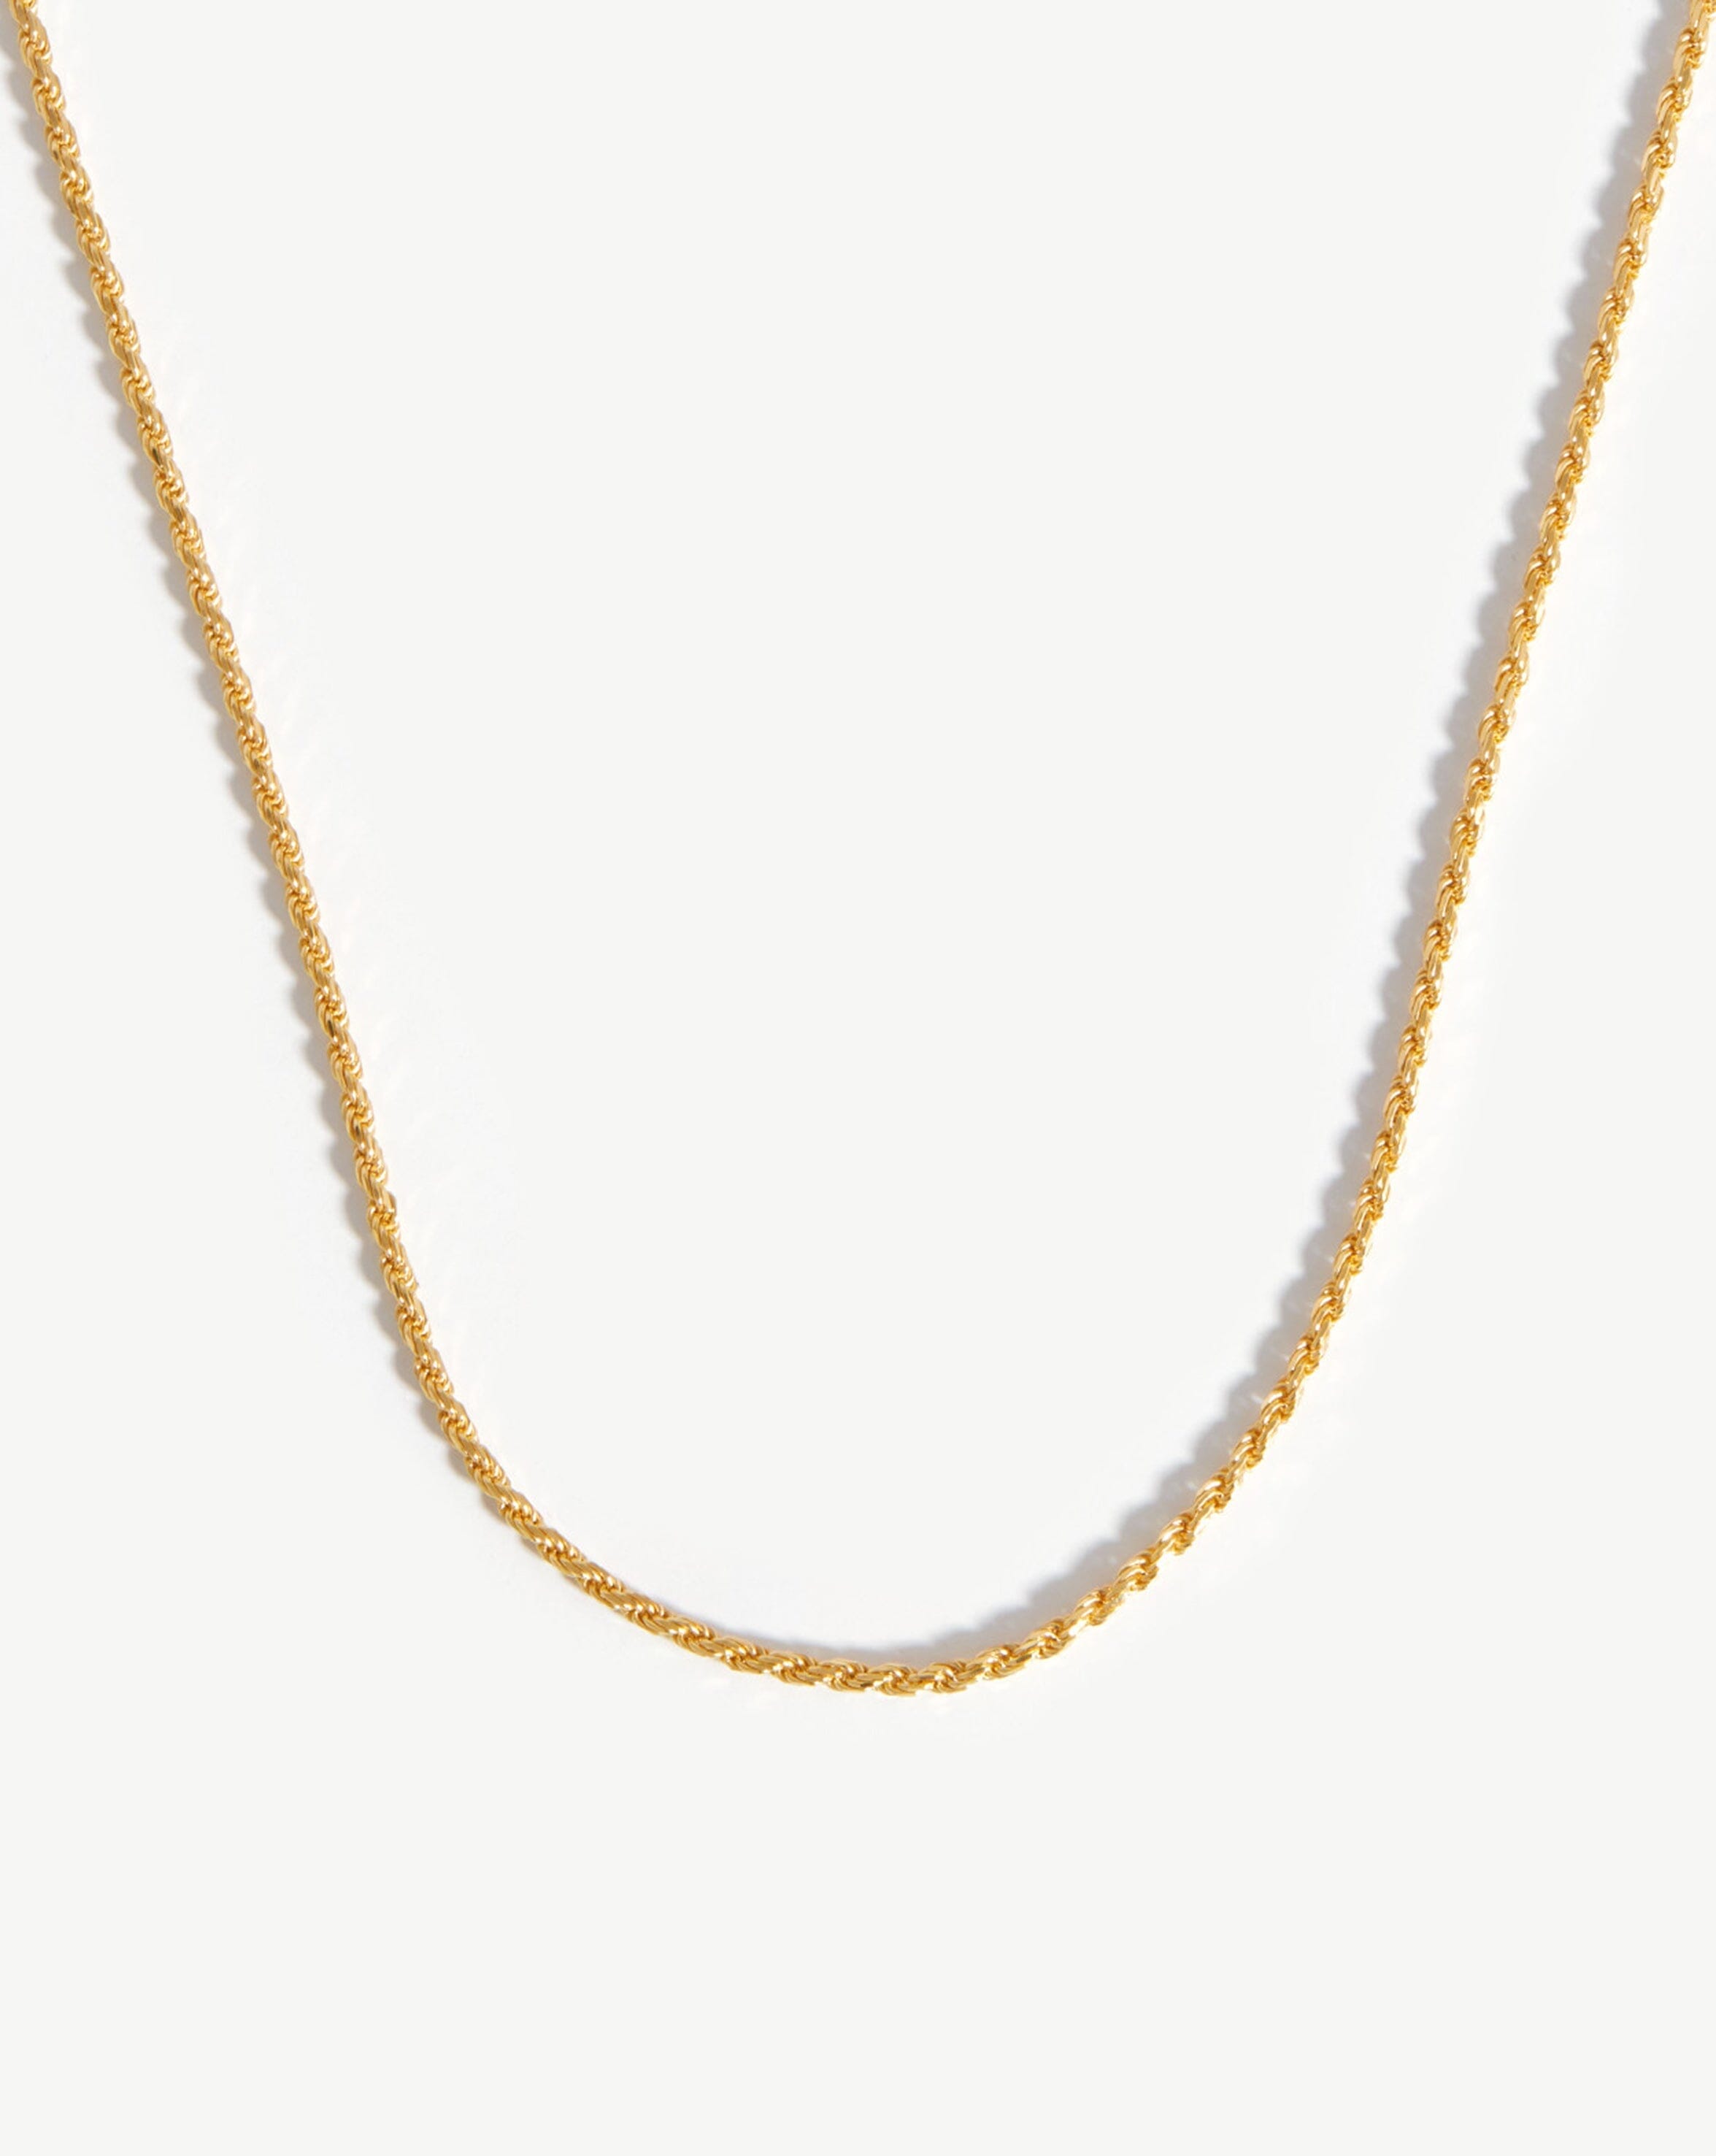 Medium Catena Chain Necklace | 18ct Gold Plated Vermeil Necklaces Missoma 18ct Gold Plated Vermeil 